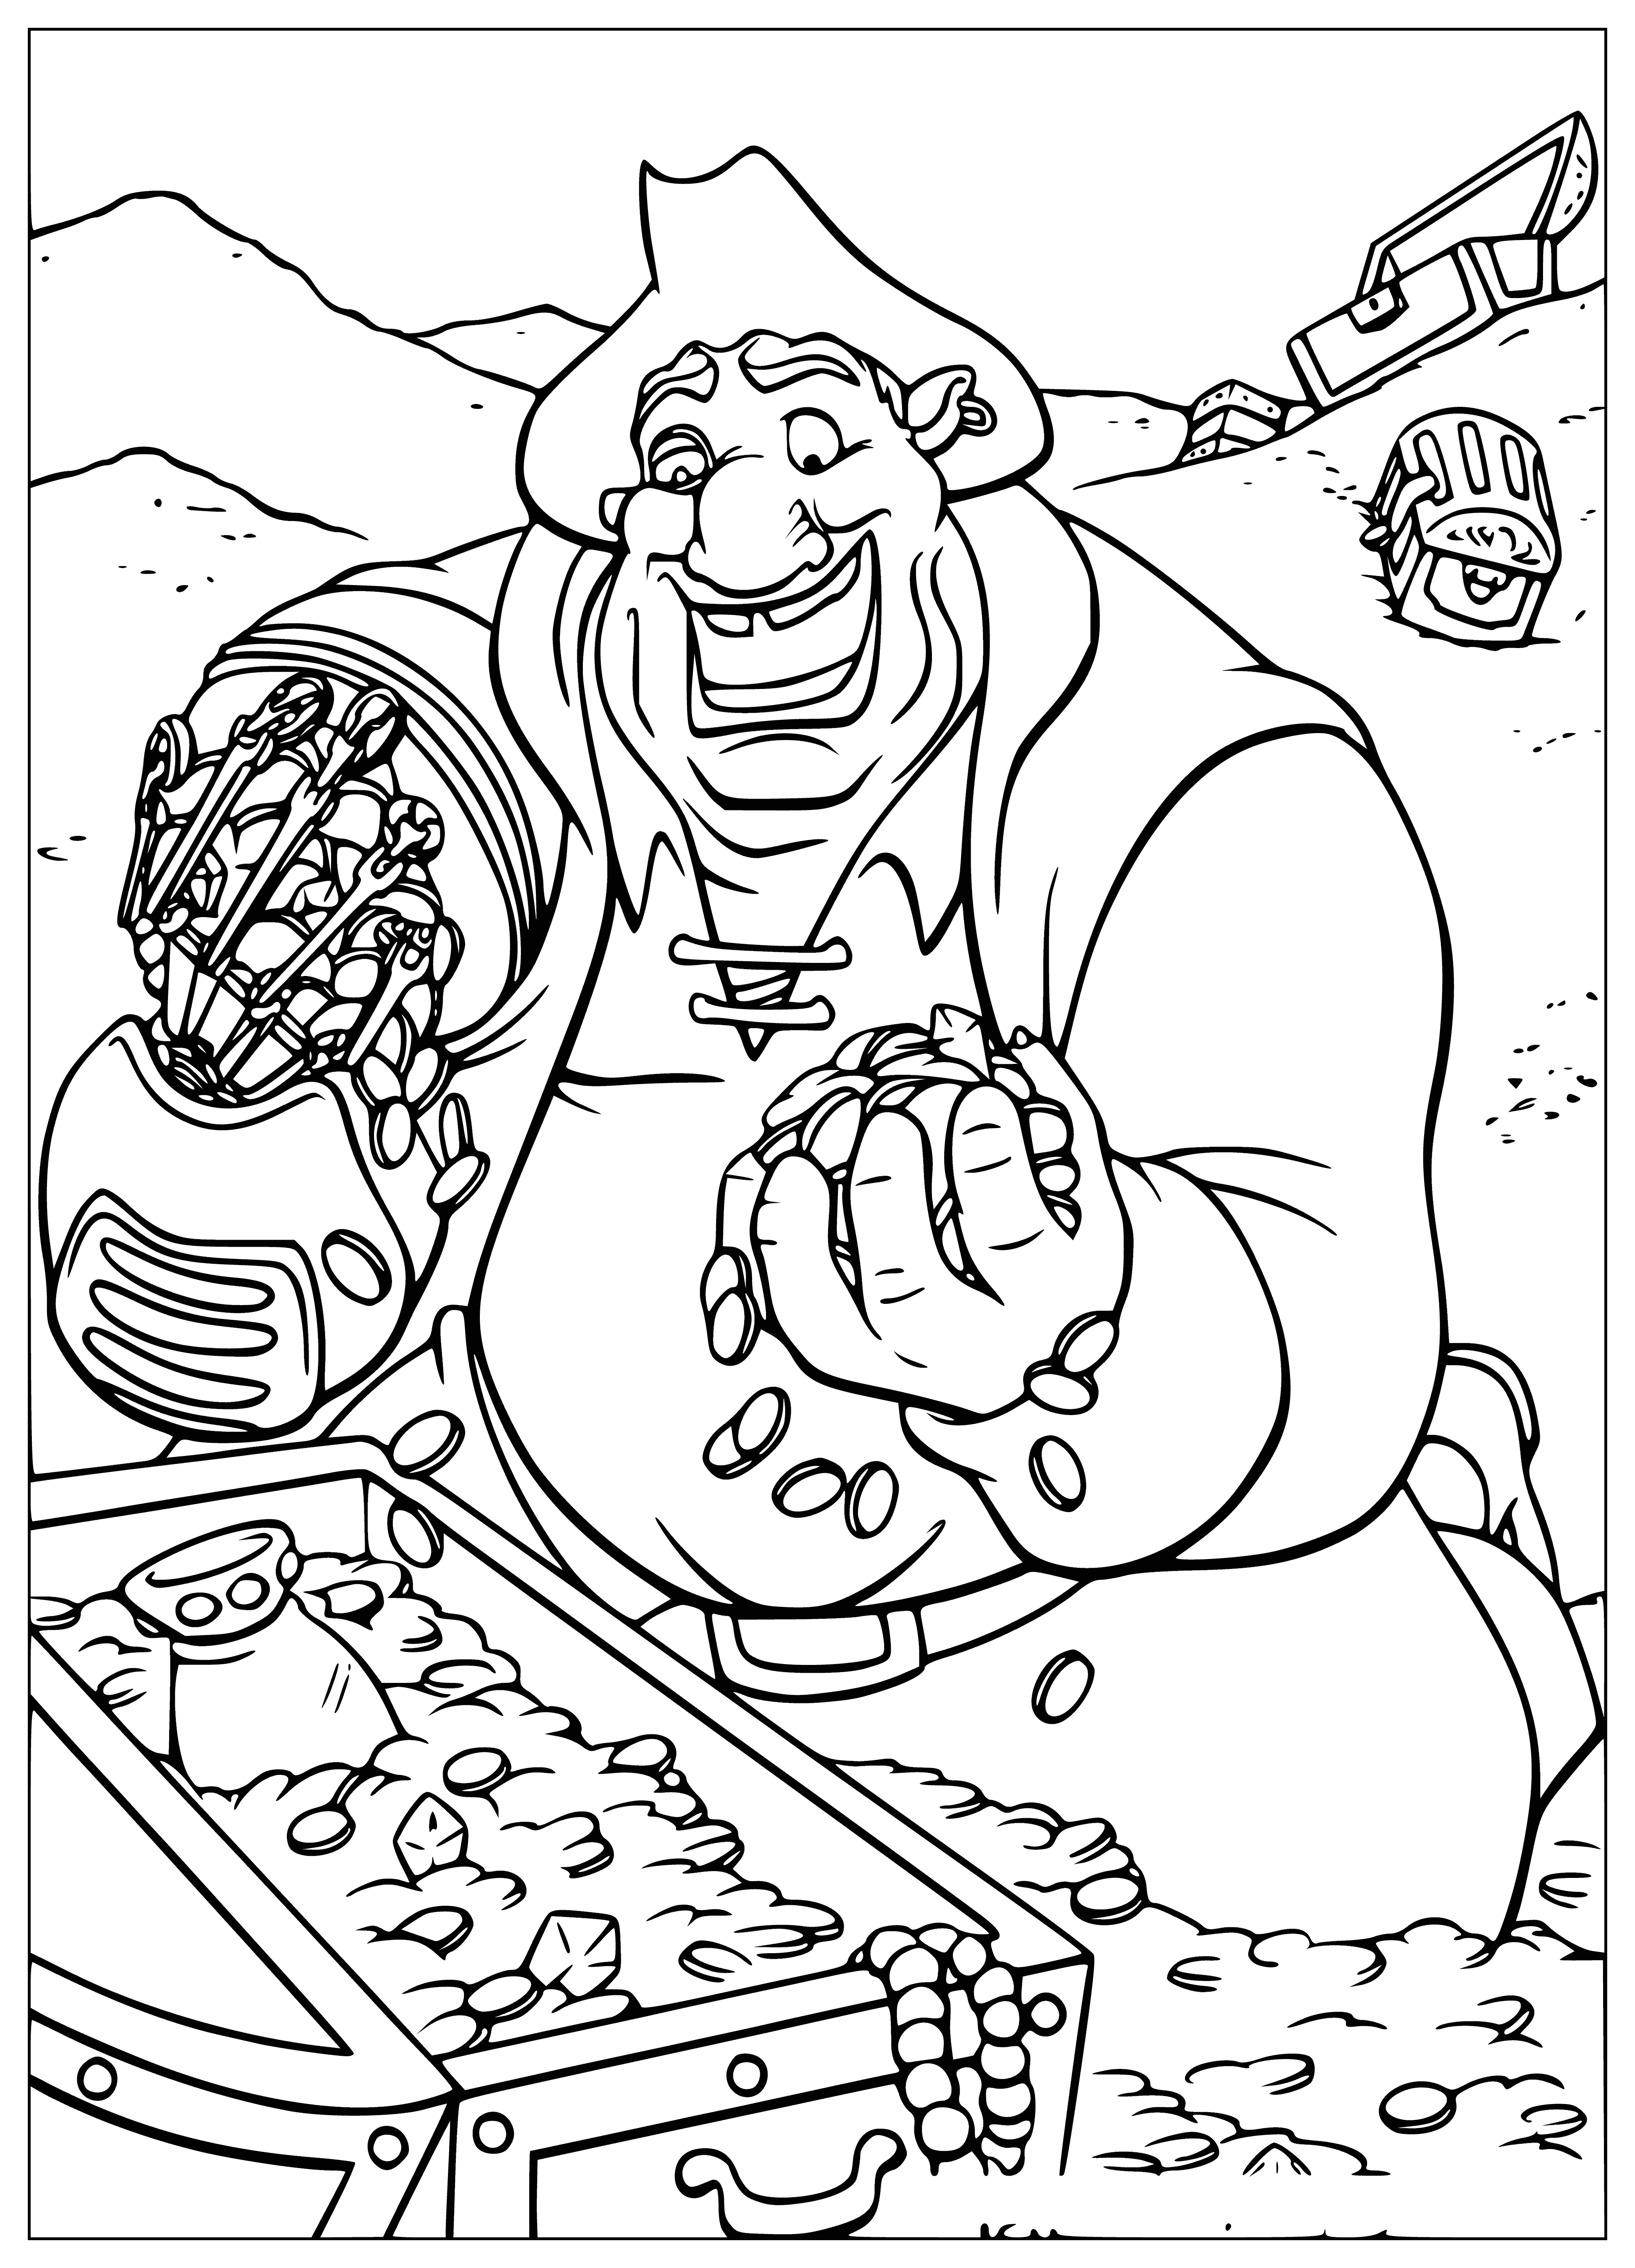 coloring page: A treasure chest overflowing with gold, weapons, armor and a map of an island with a red "X" - time to get digging!